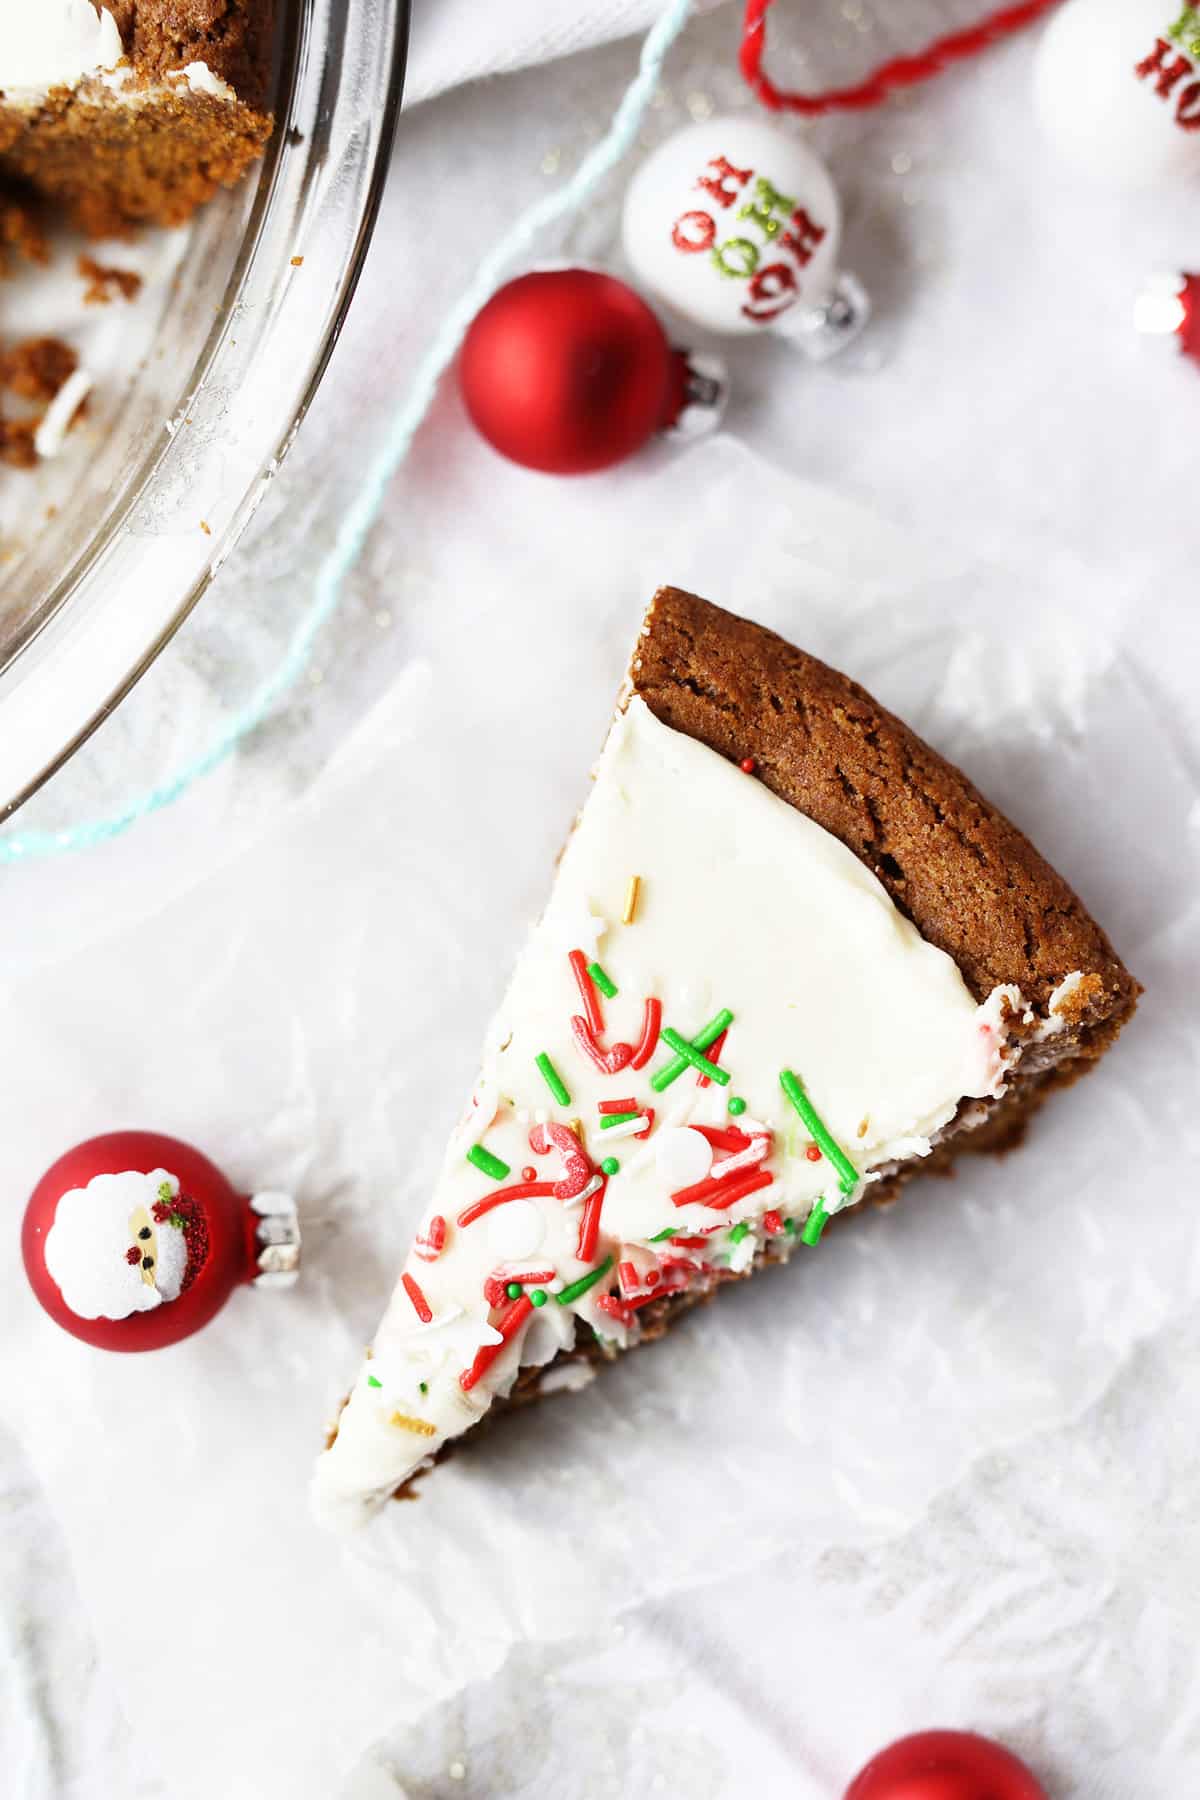 These Gingerbread Cookie Bars are soft and chewy in the center with a crispy chewy crust, vegan and only requires 1 bowl to make!